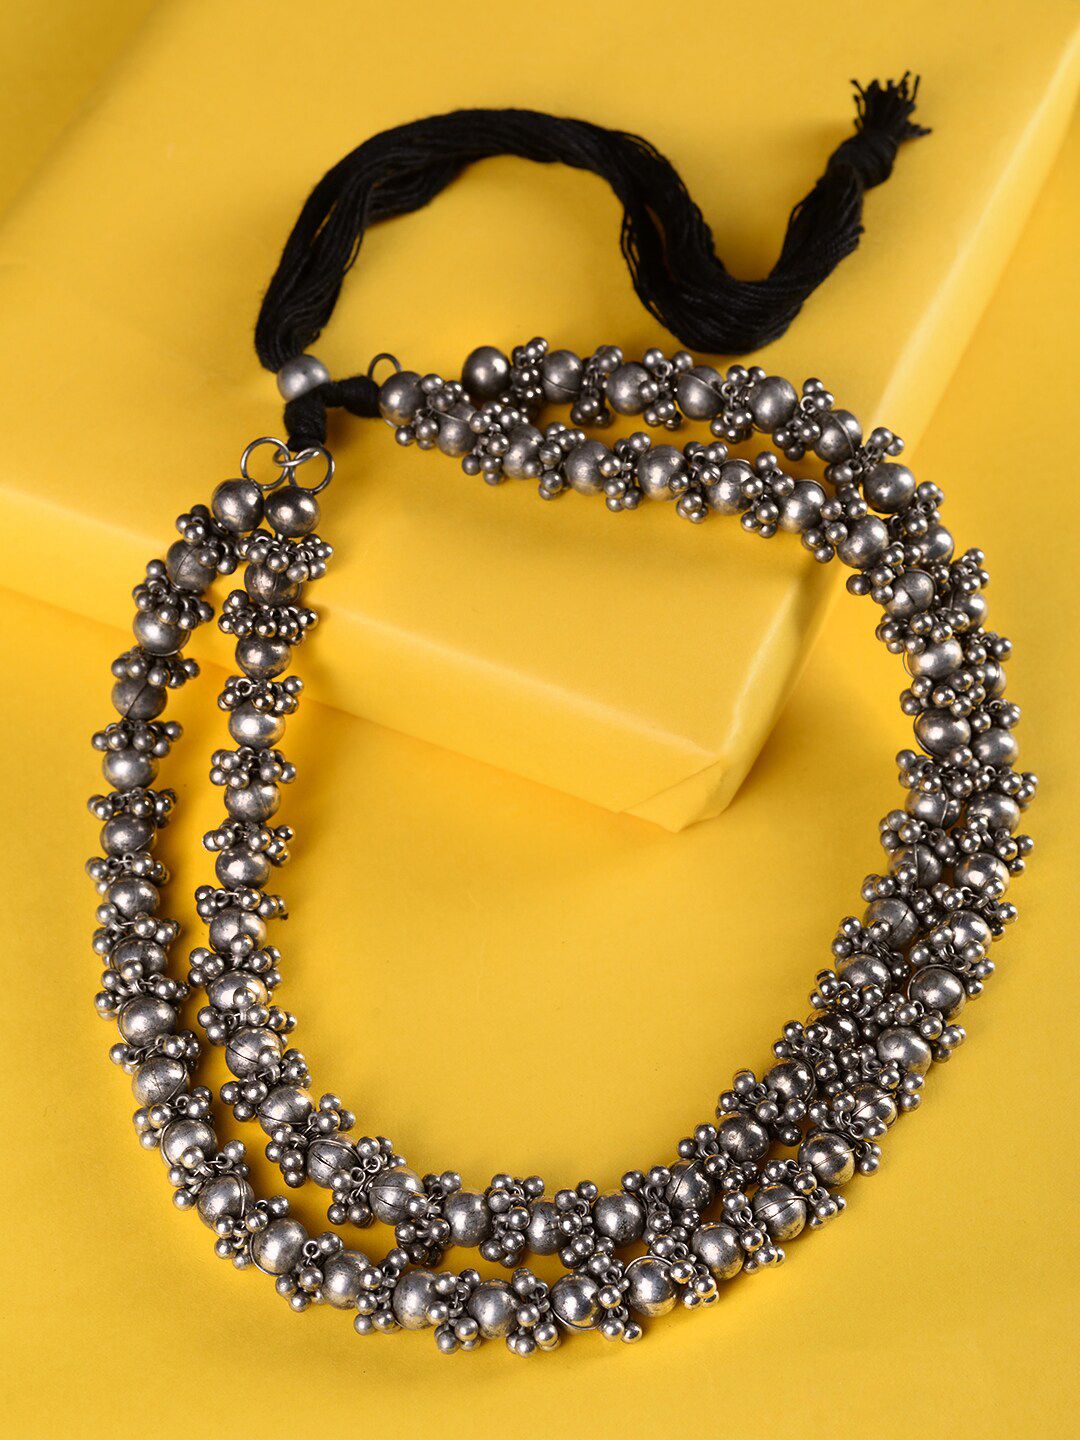 Saraf RS Jewellery Silver-Toned & Black German Silver Oxidised Necklace Price in India